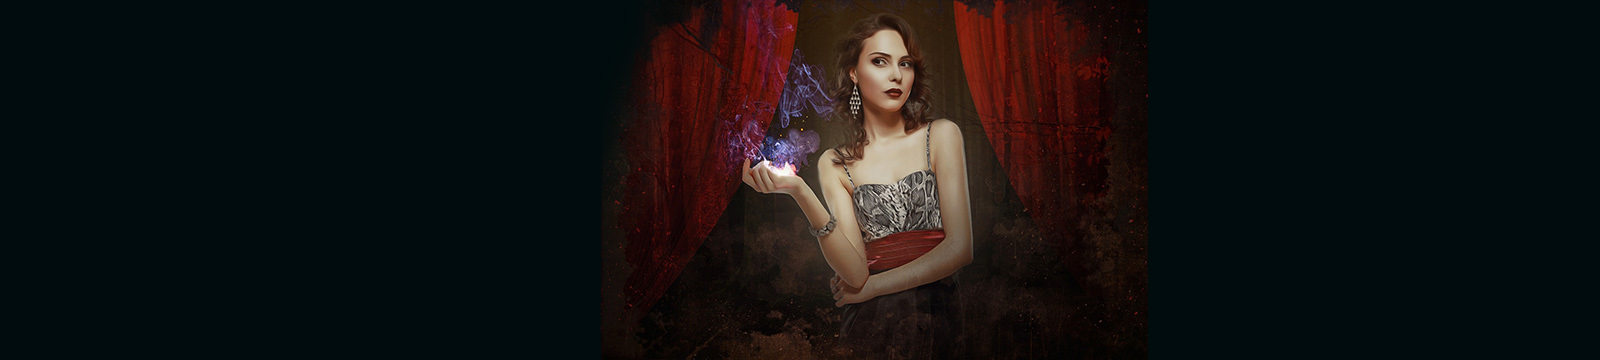 Illustration of a woman holding out her hand filled with a flame as smoke rises above. Red stage curtains in the background.